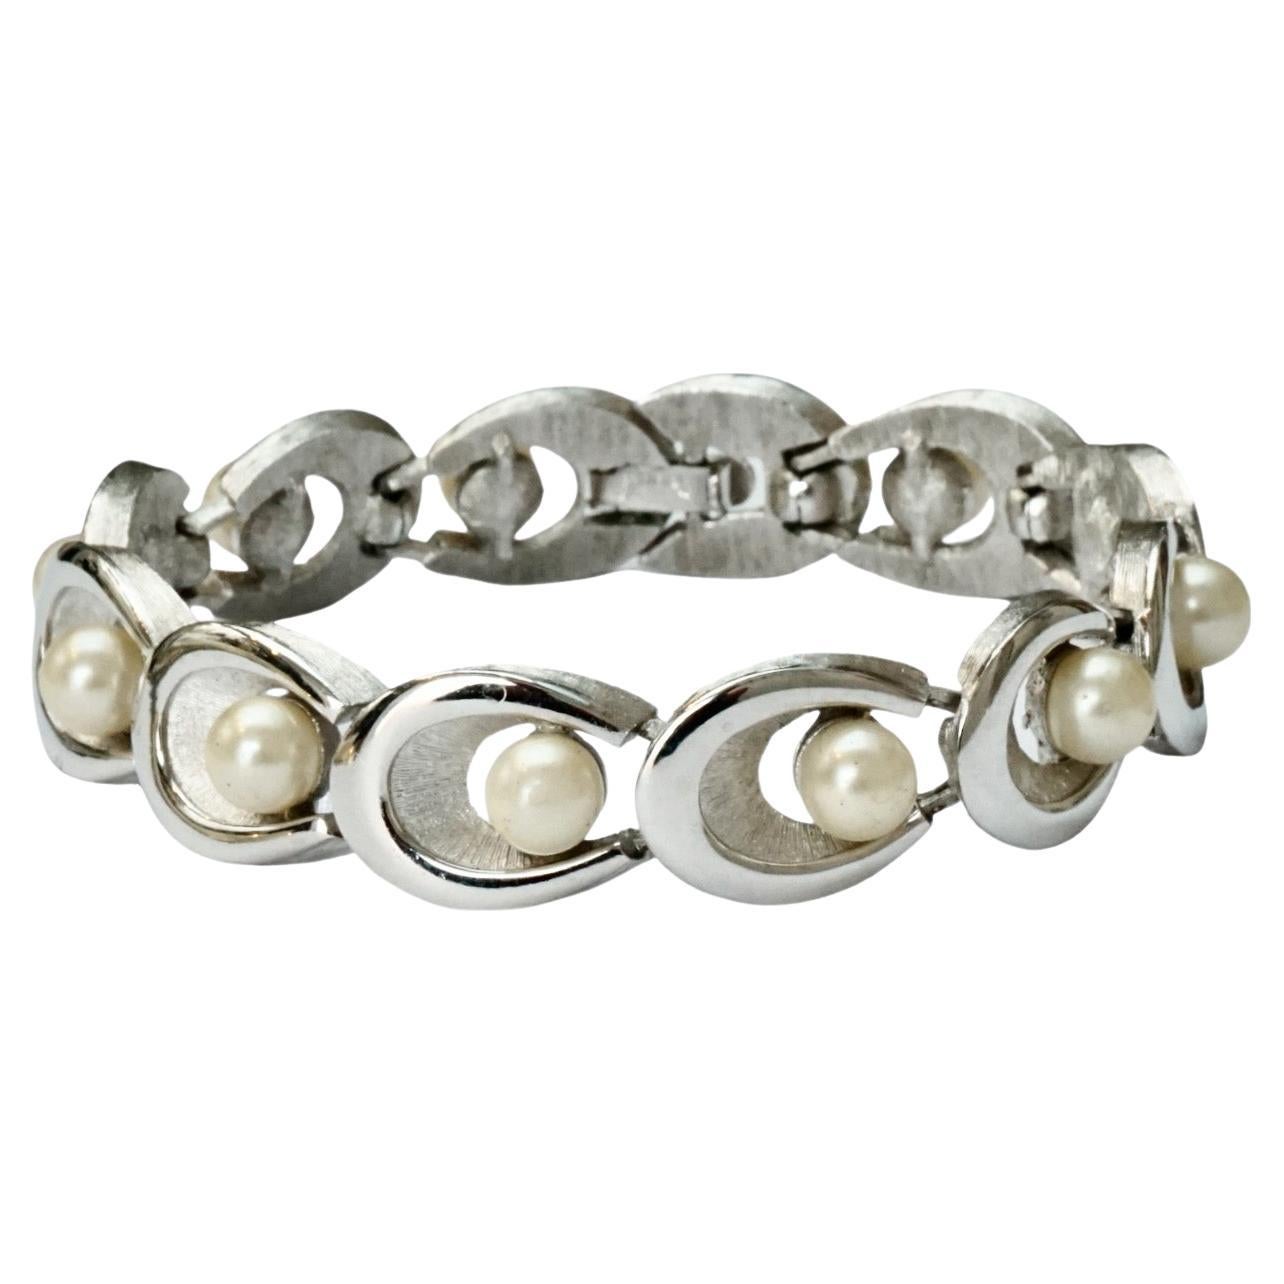 Trifari Silver Plated Brushed and Shiny Bracelet with Faux Pearls circa 1960s For Sale